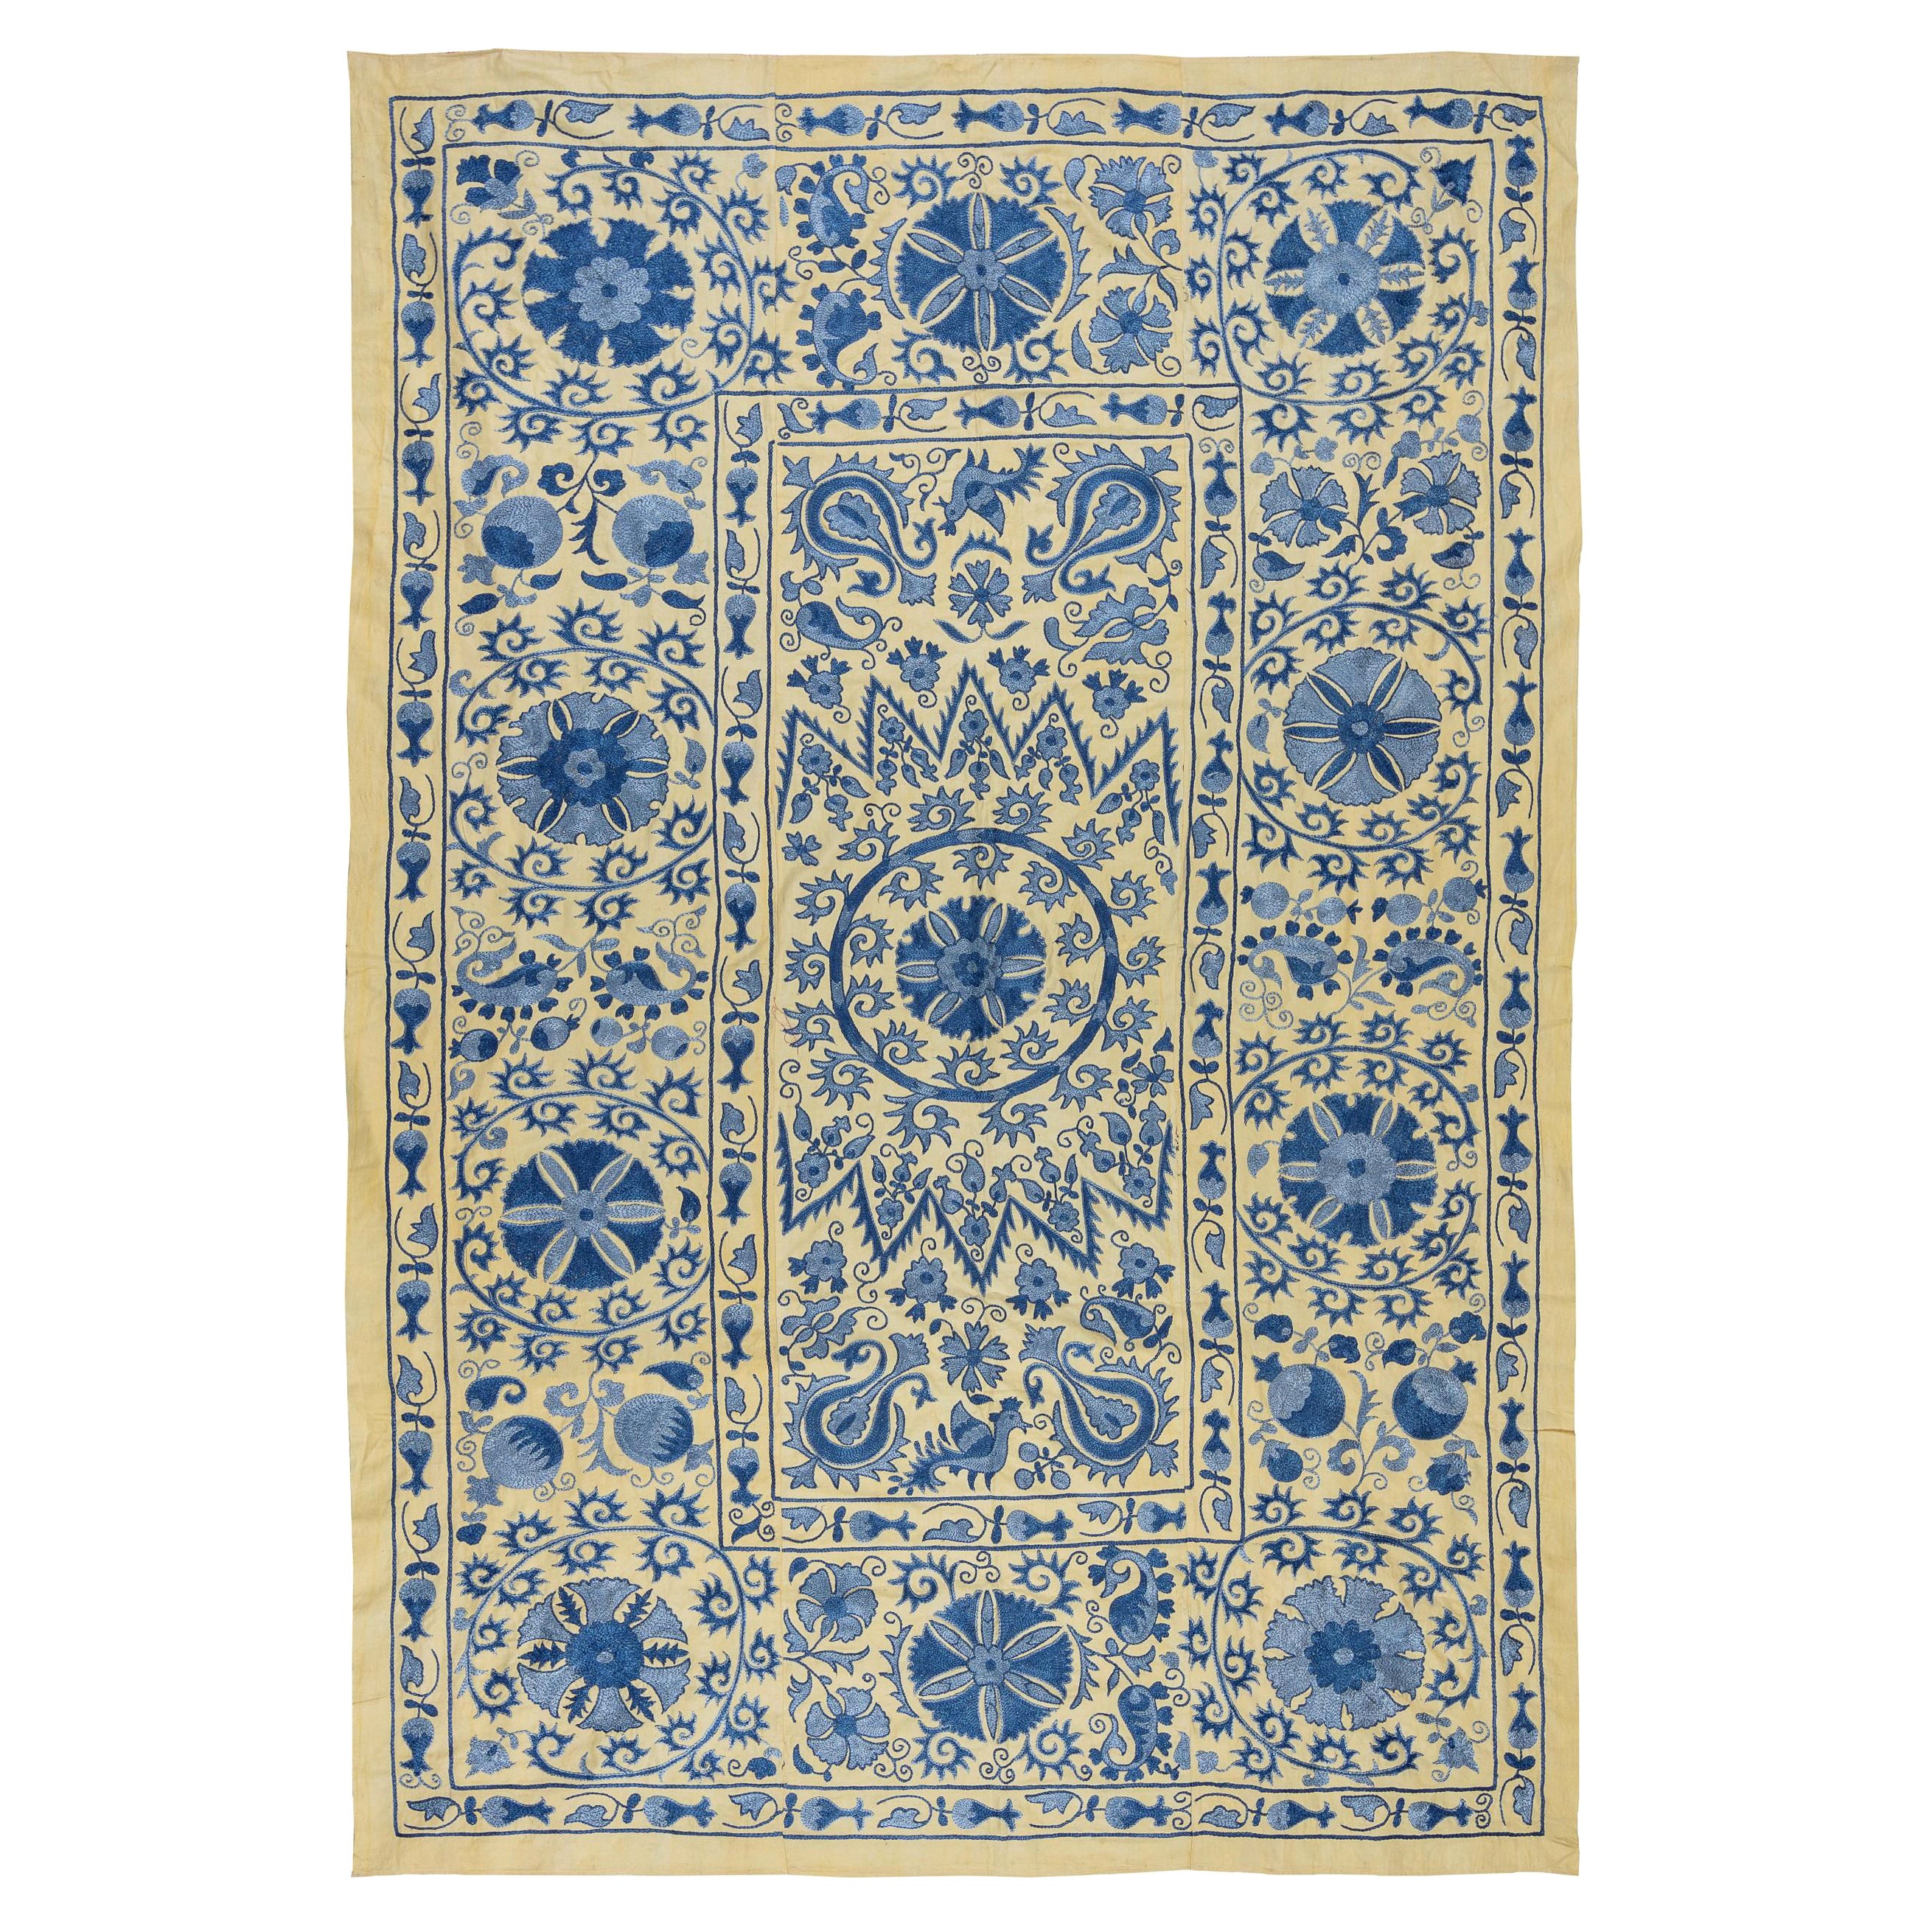 4.8x7 Ft Suzani Embroidered Cotton & Silk Wall Hanging in Beige and Light Blue For Sale